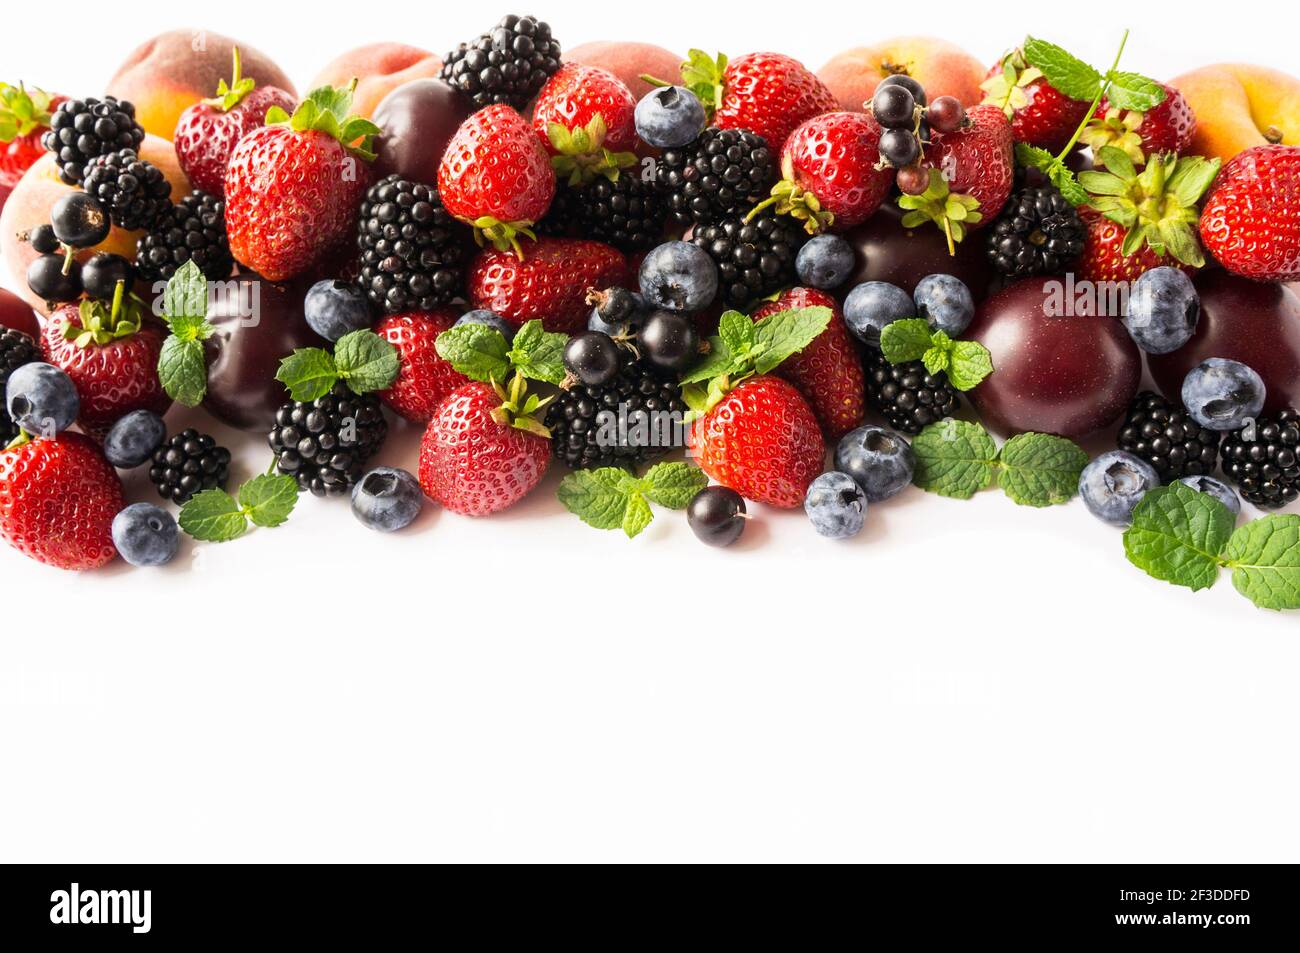 Mix berries and fruits on white background. Ripe blackberries, strawberries, bleberries, blackcurrants and plums. Top view. Background berries and fru Stock Photo